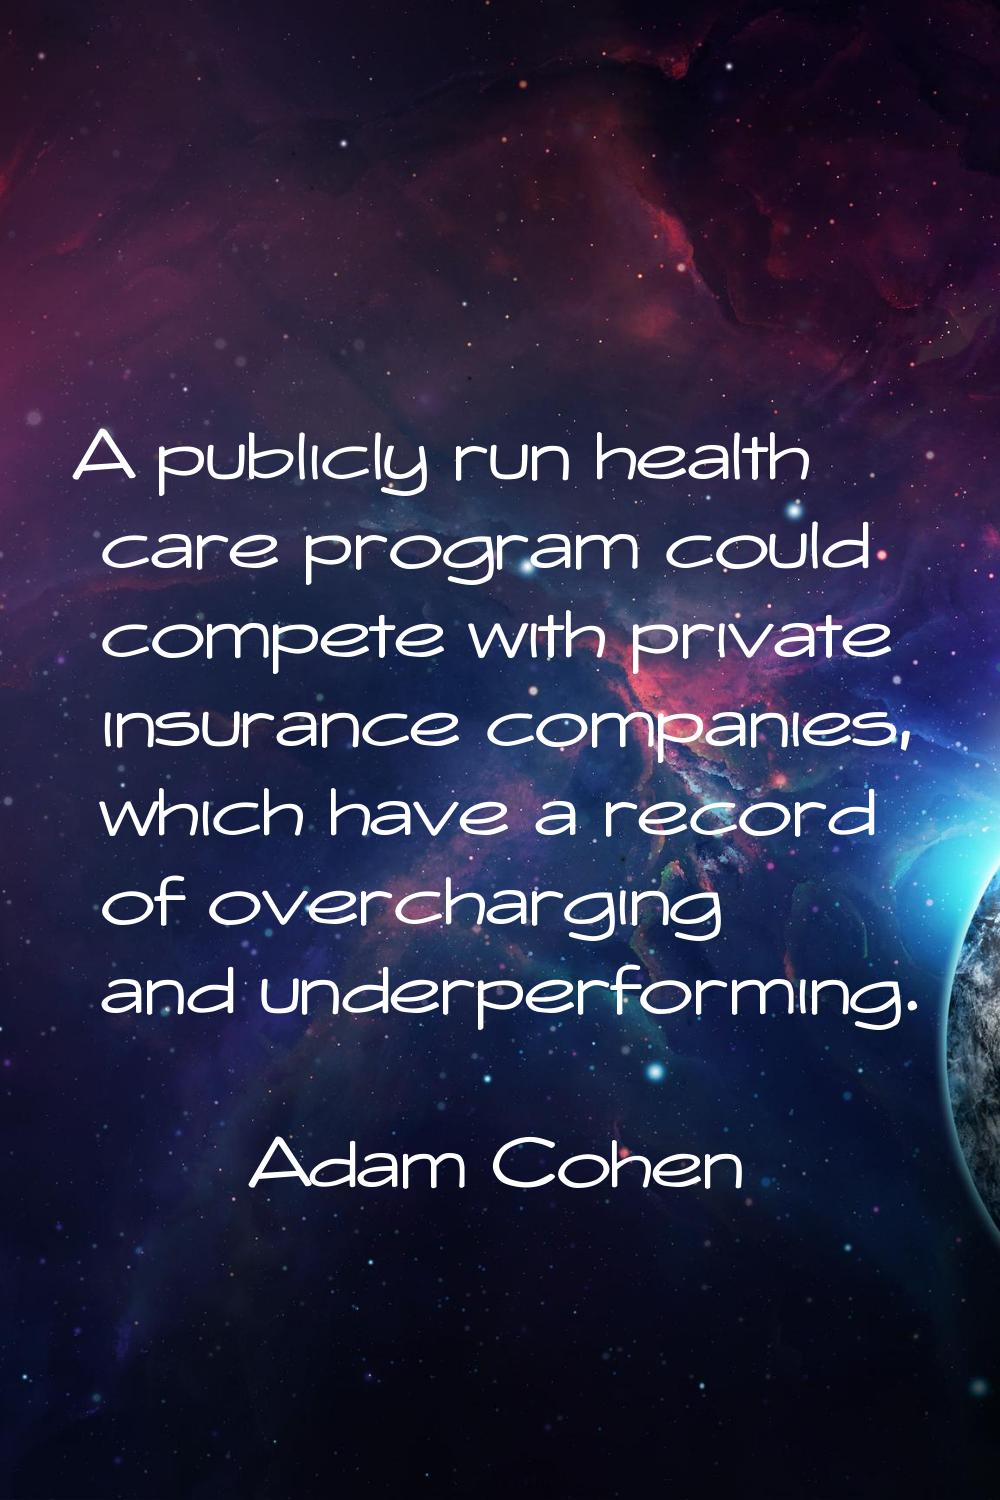 A publicly run health care program could compete with private insurance companies, which have a rec